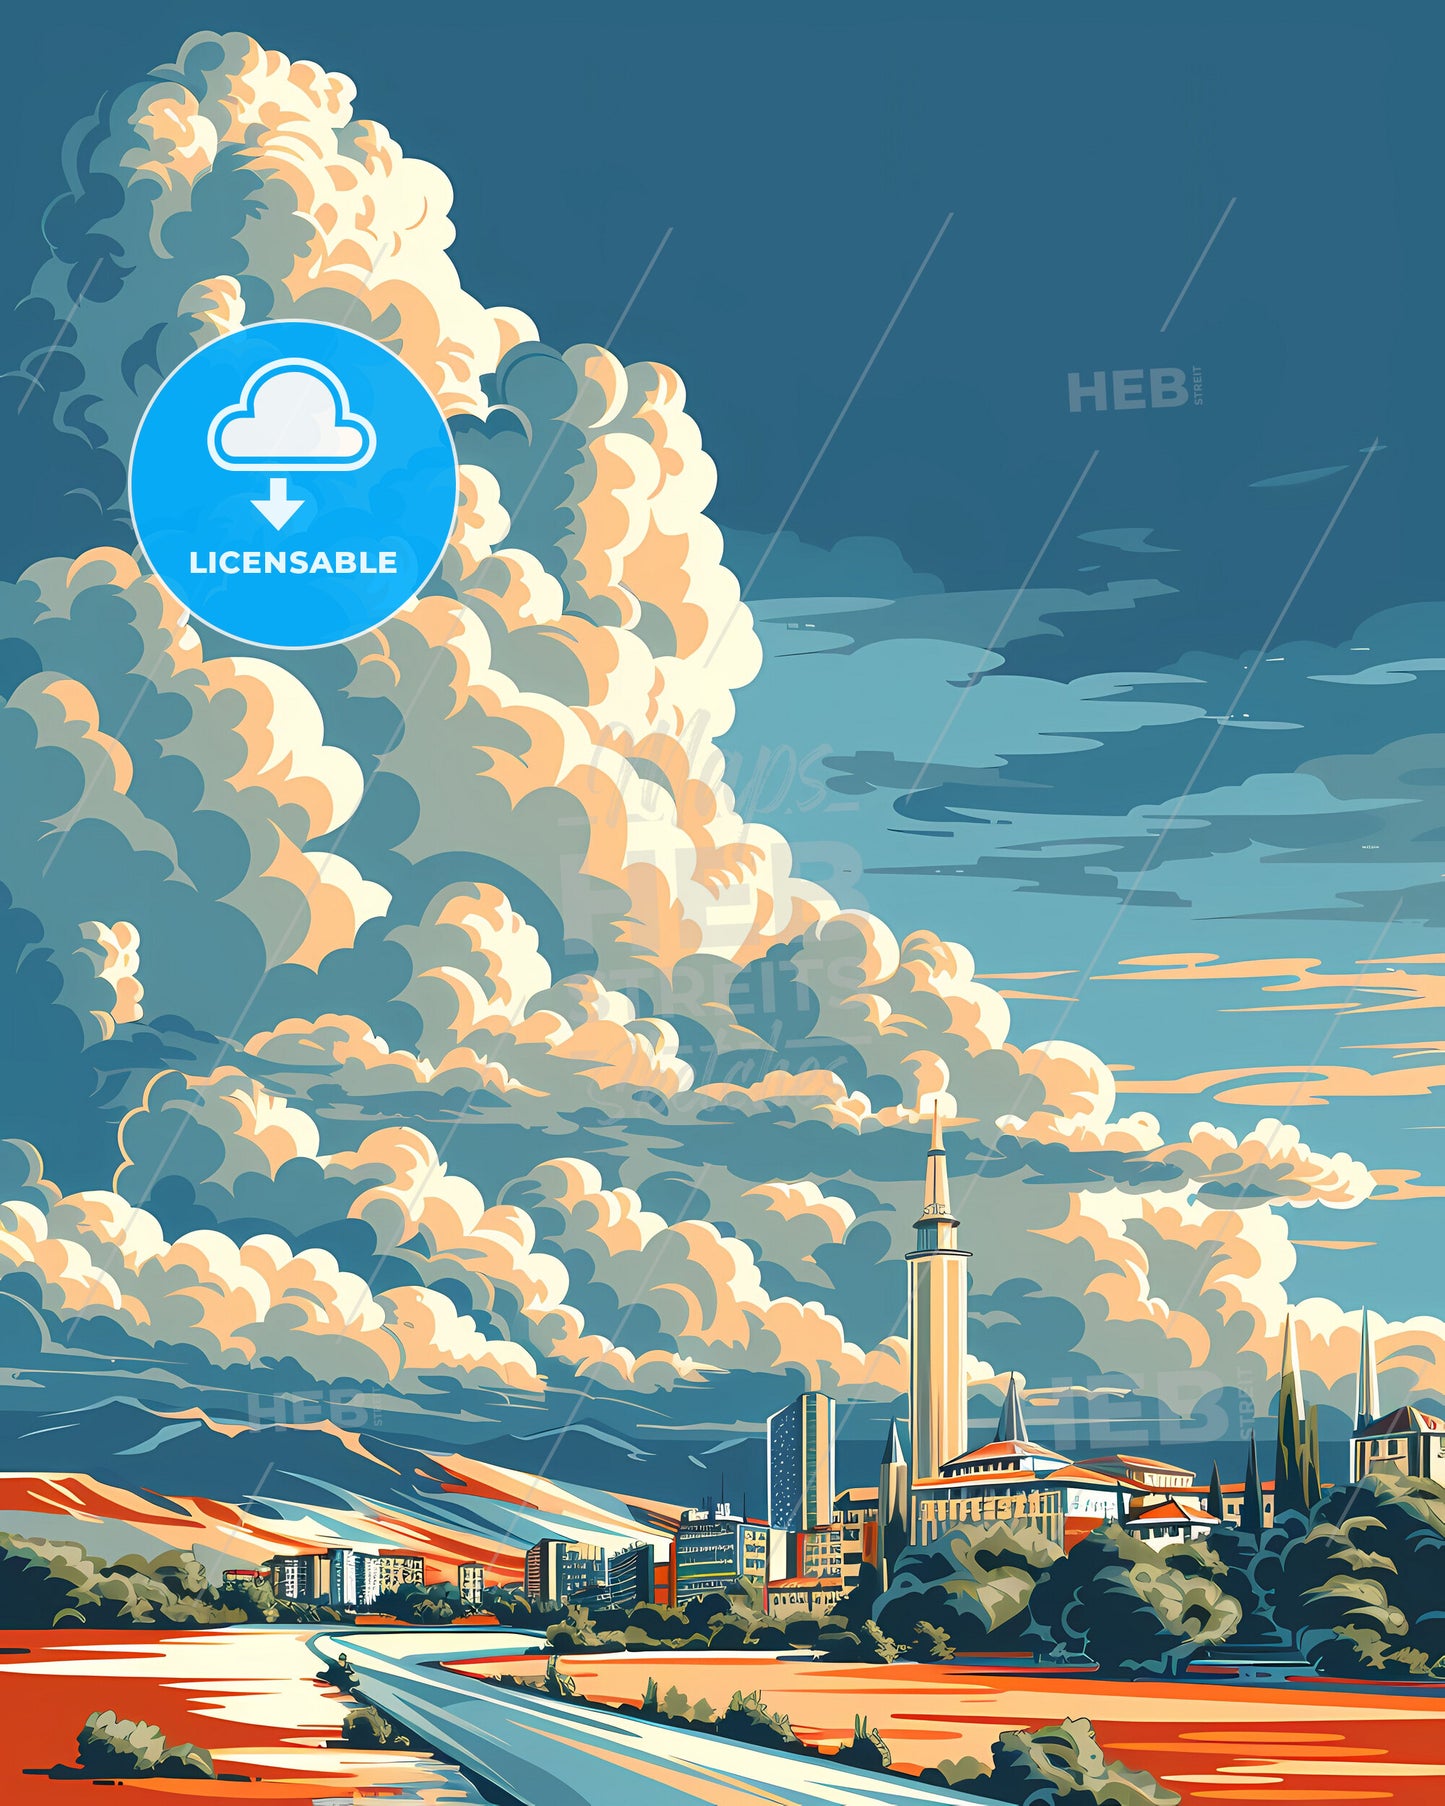 Minimalist Skyline of Albania: Vintage Travel Poster Featuring Vibrant Painting of Cityscapes and Cloud Formations